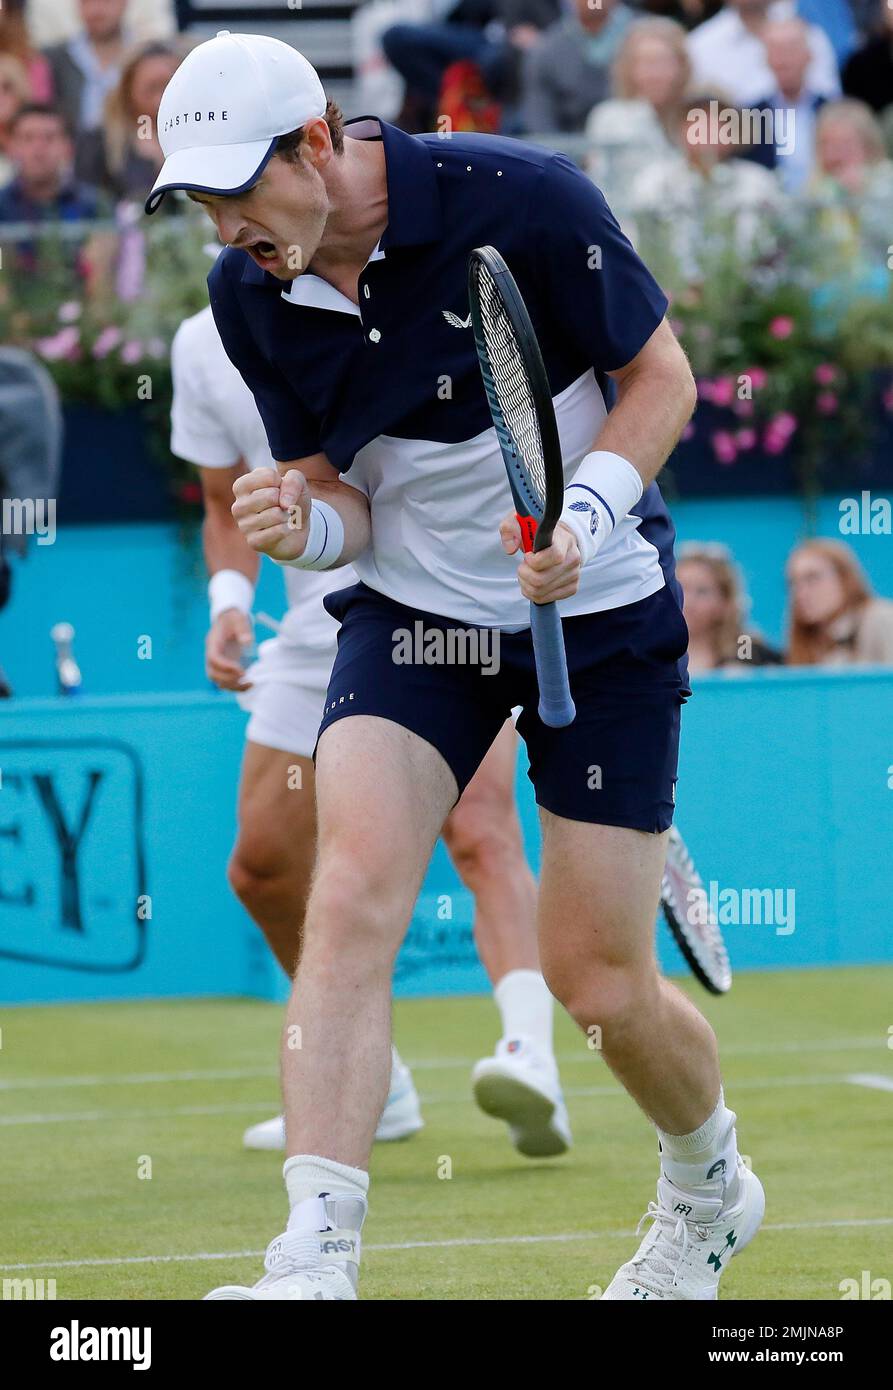 Andy Murray of Britain celebrates a point as he plays with Feliciano Lopez of Spain during their doubles match against Juan Sebastian Cabal and Robert Farah of Colombia at the Queens Club